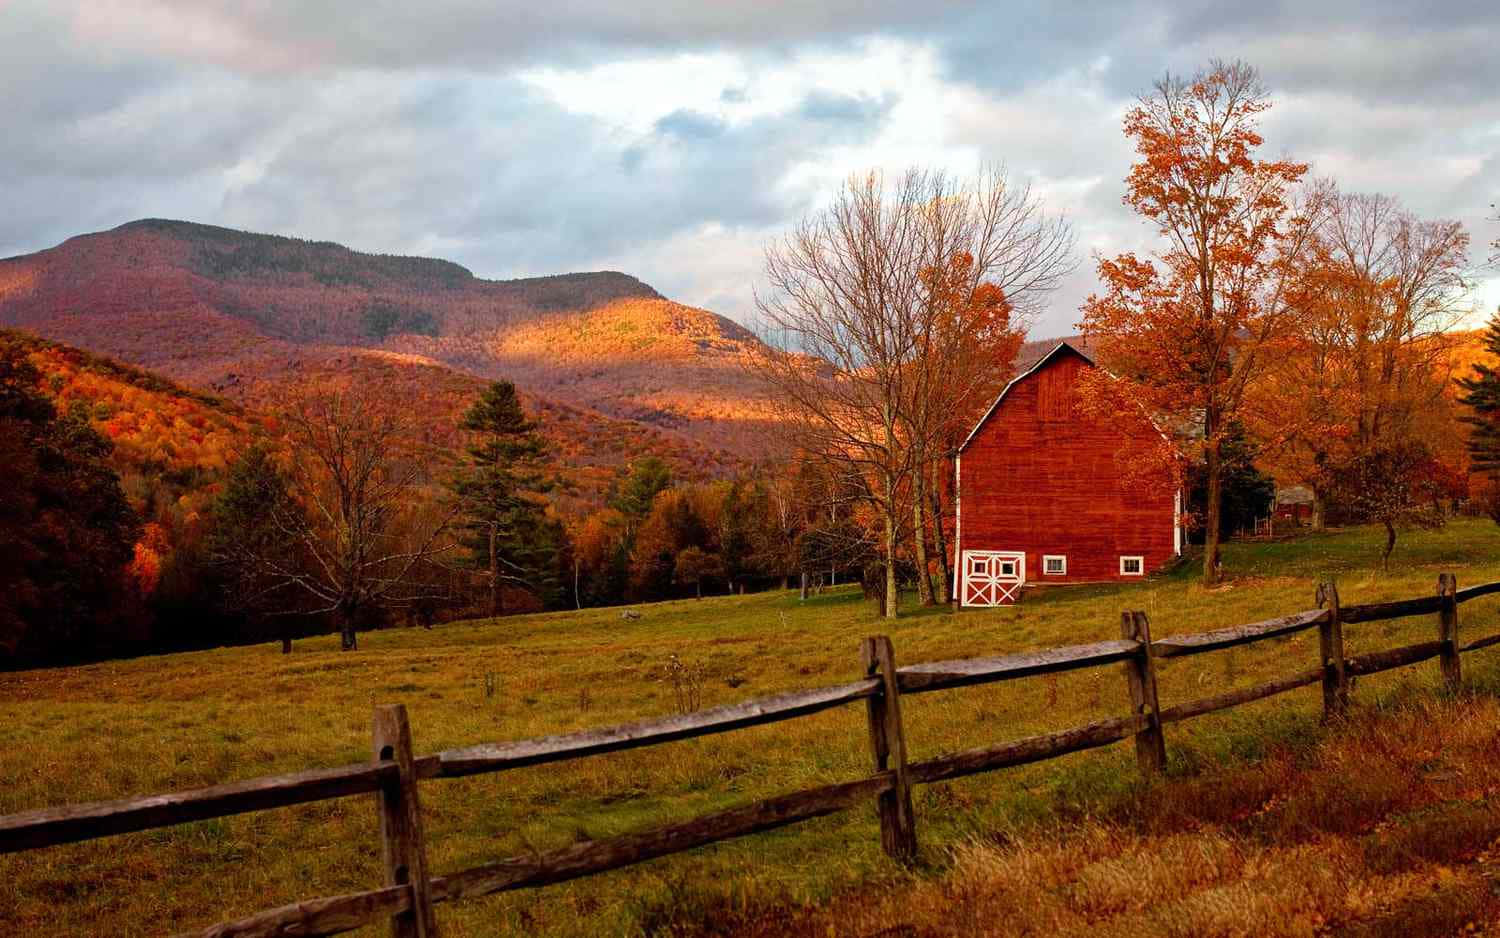 A Red Barn In The Fall With Mountains In The Background